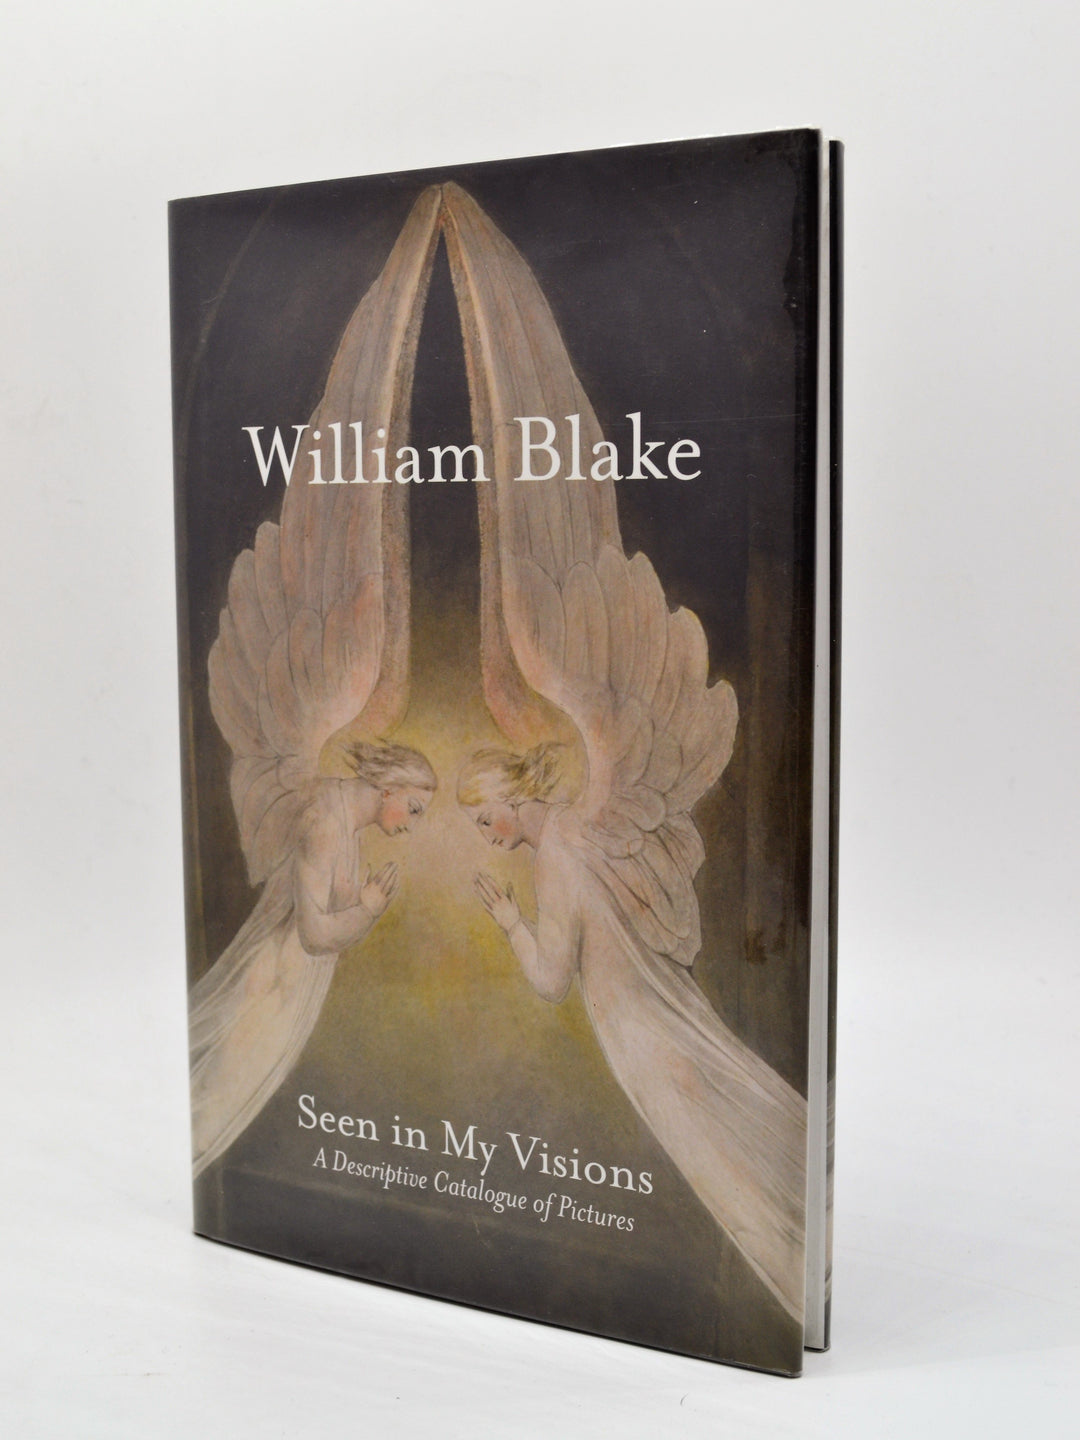 Myrone, Martin ( edits ) - William Blake : Seen in my Visions | back cover